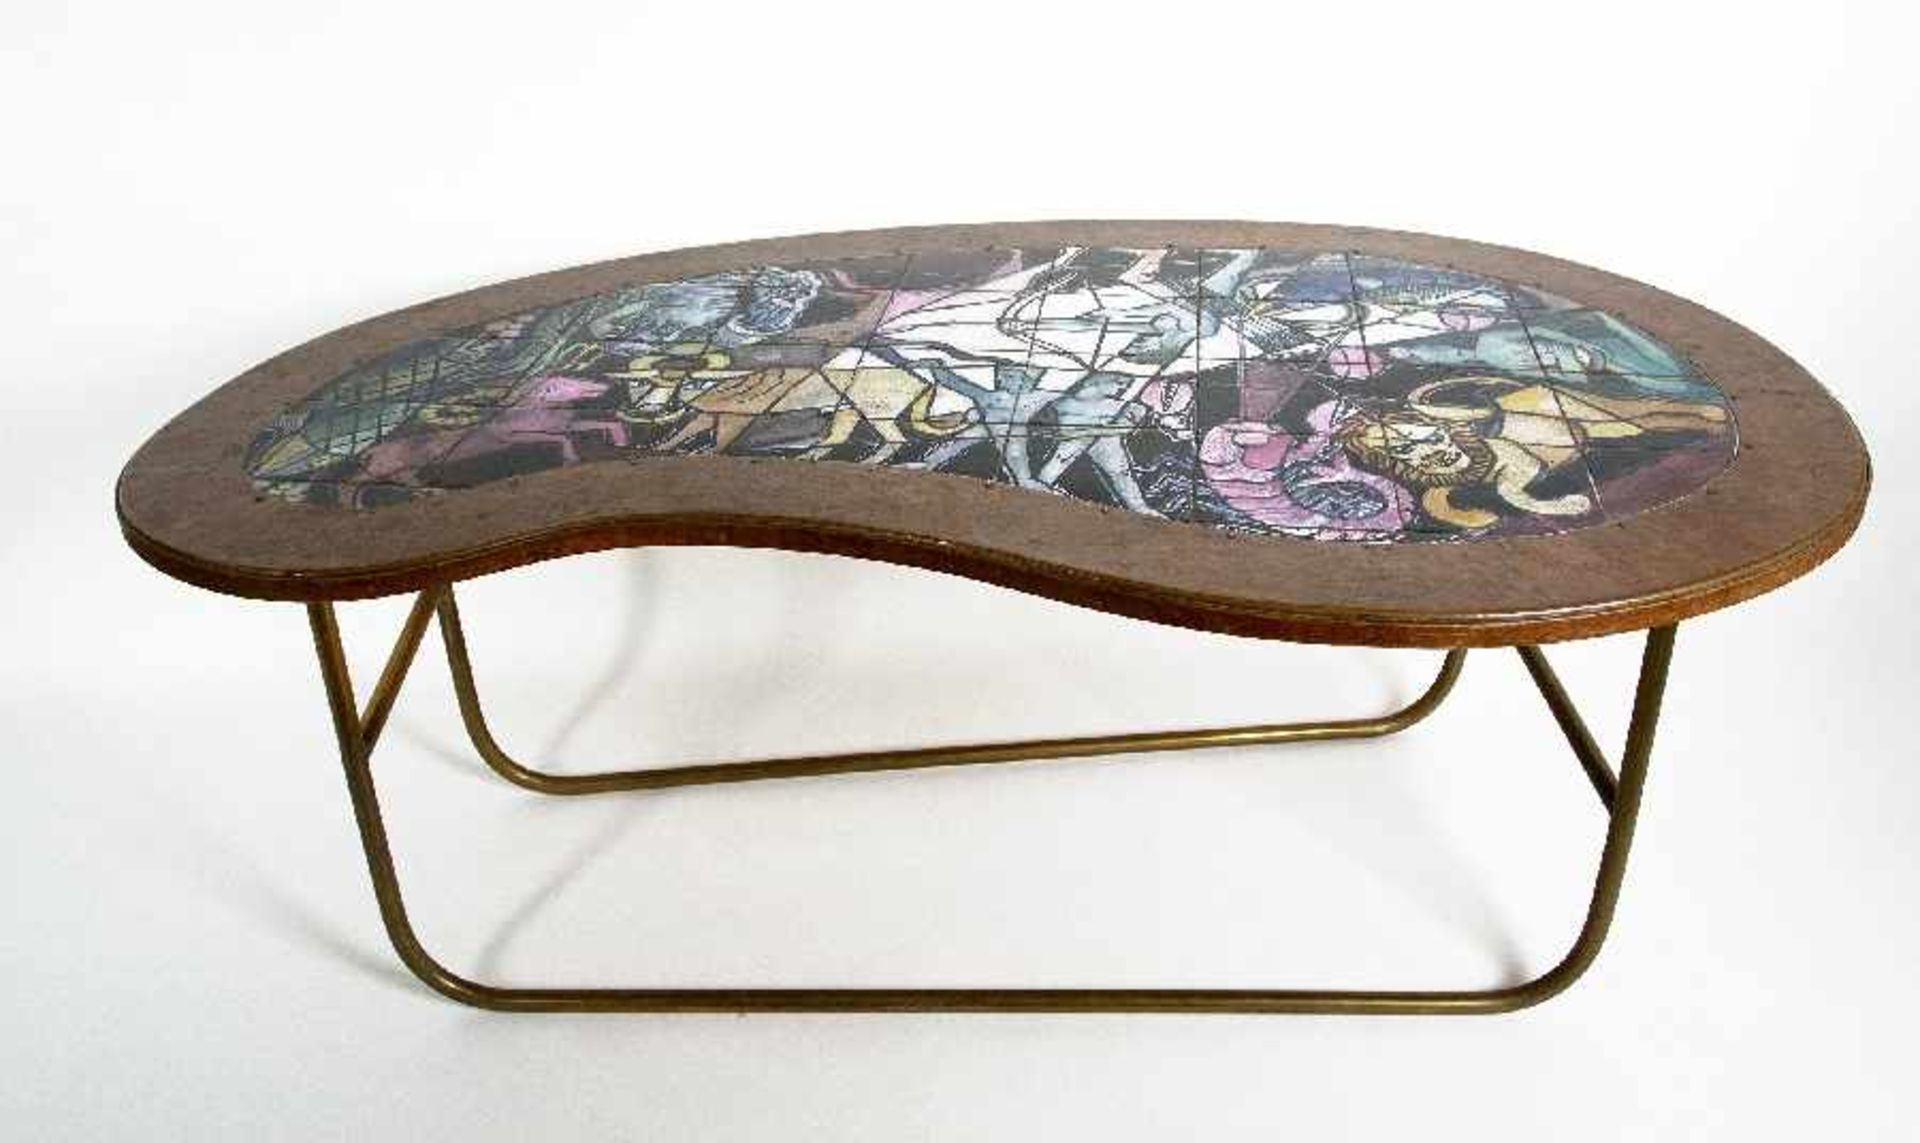 Designer of the 50sCoffee table with zodiac motifsPainted ceramic plates and hammered copper sheet